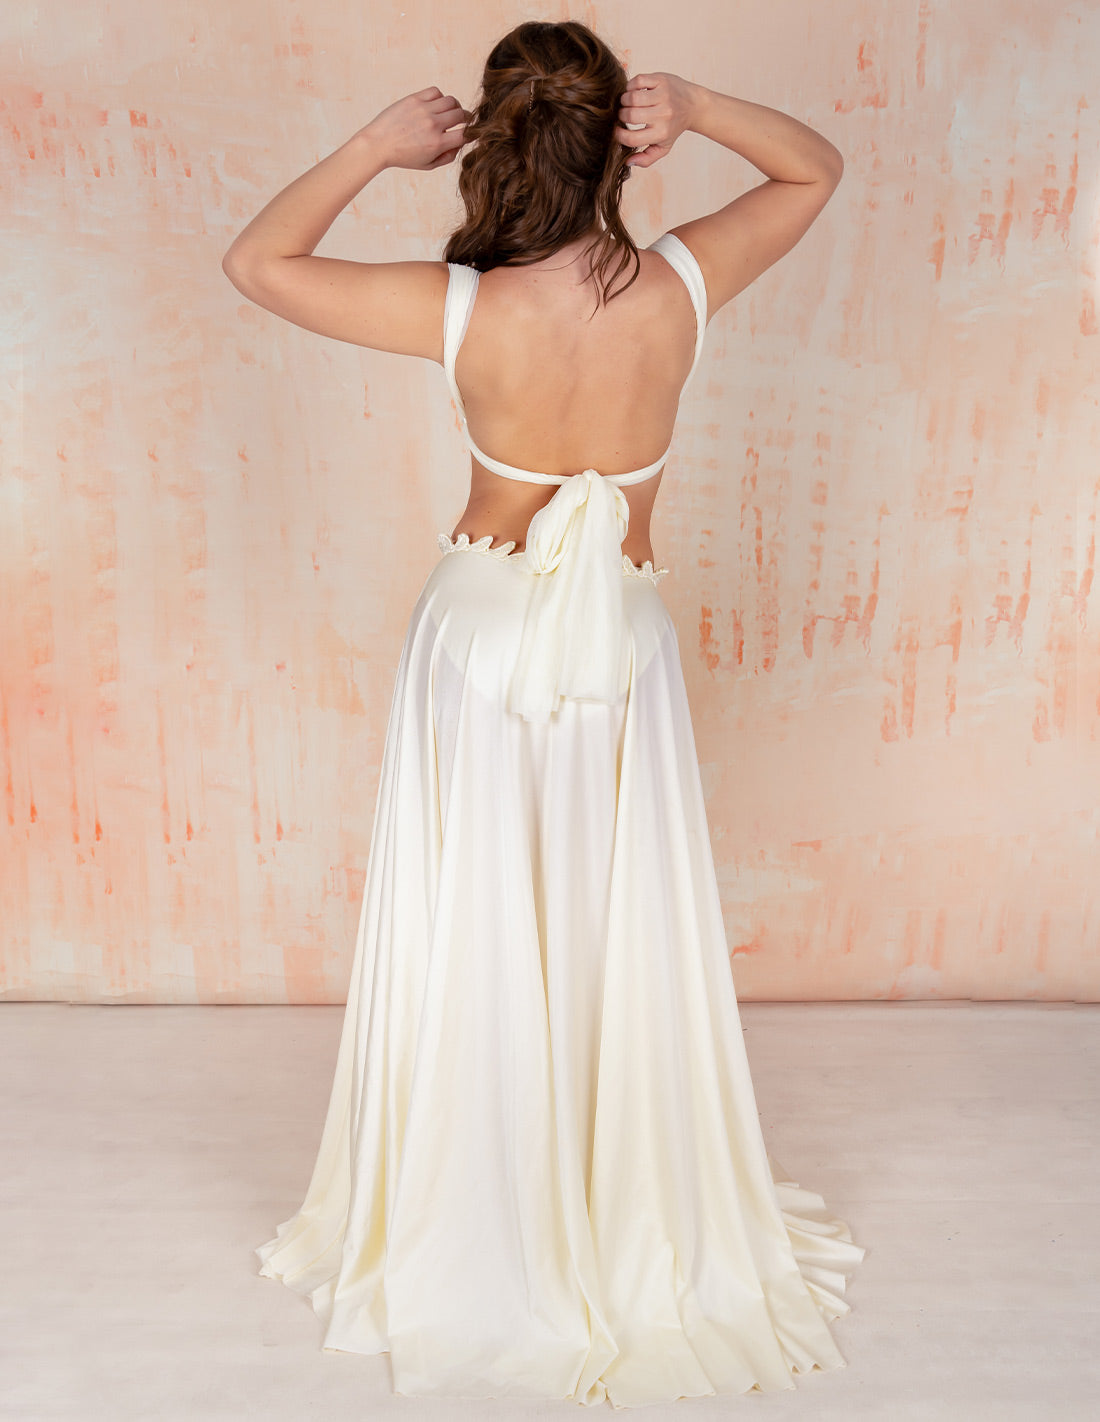 Wings Glow Dress Ivory. Dress With Hand Woven Macramé In Ivory. Entreaguas